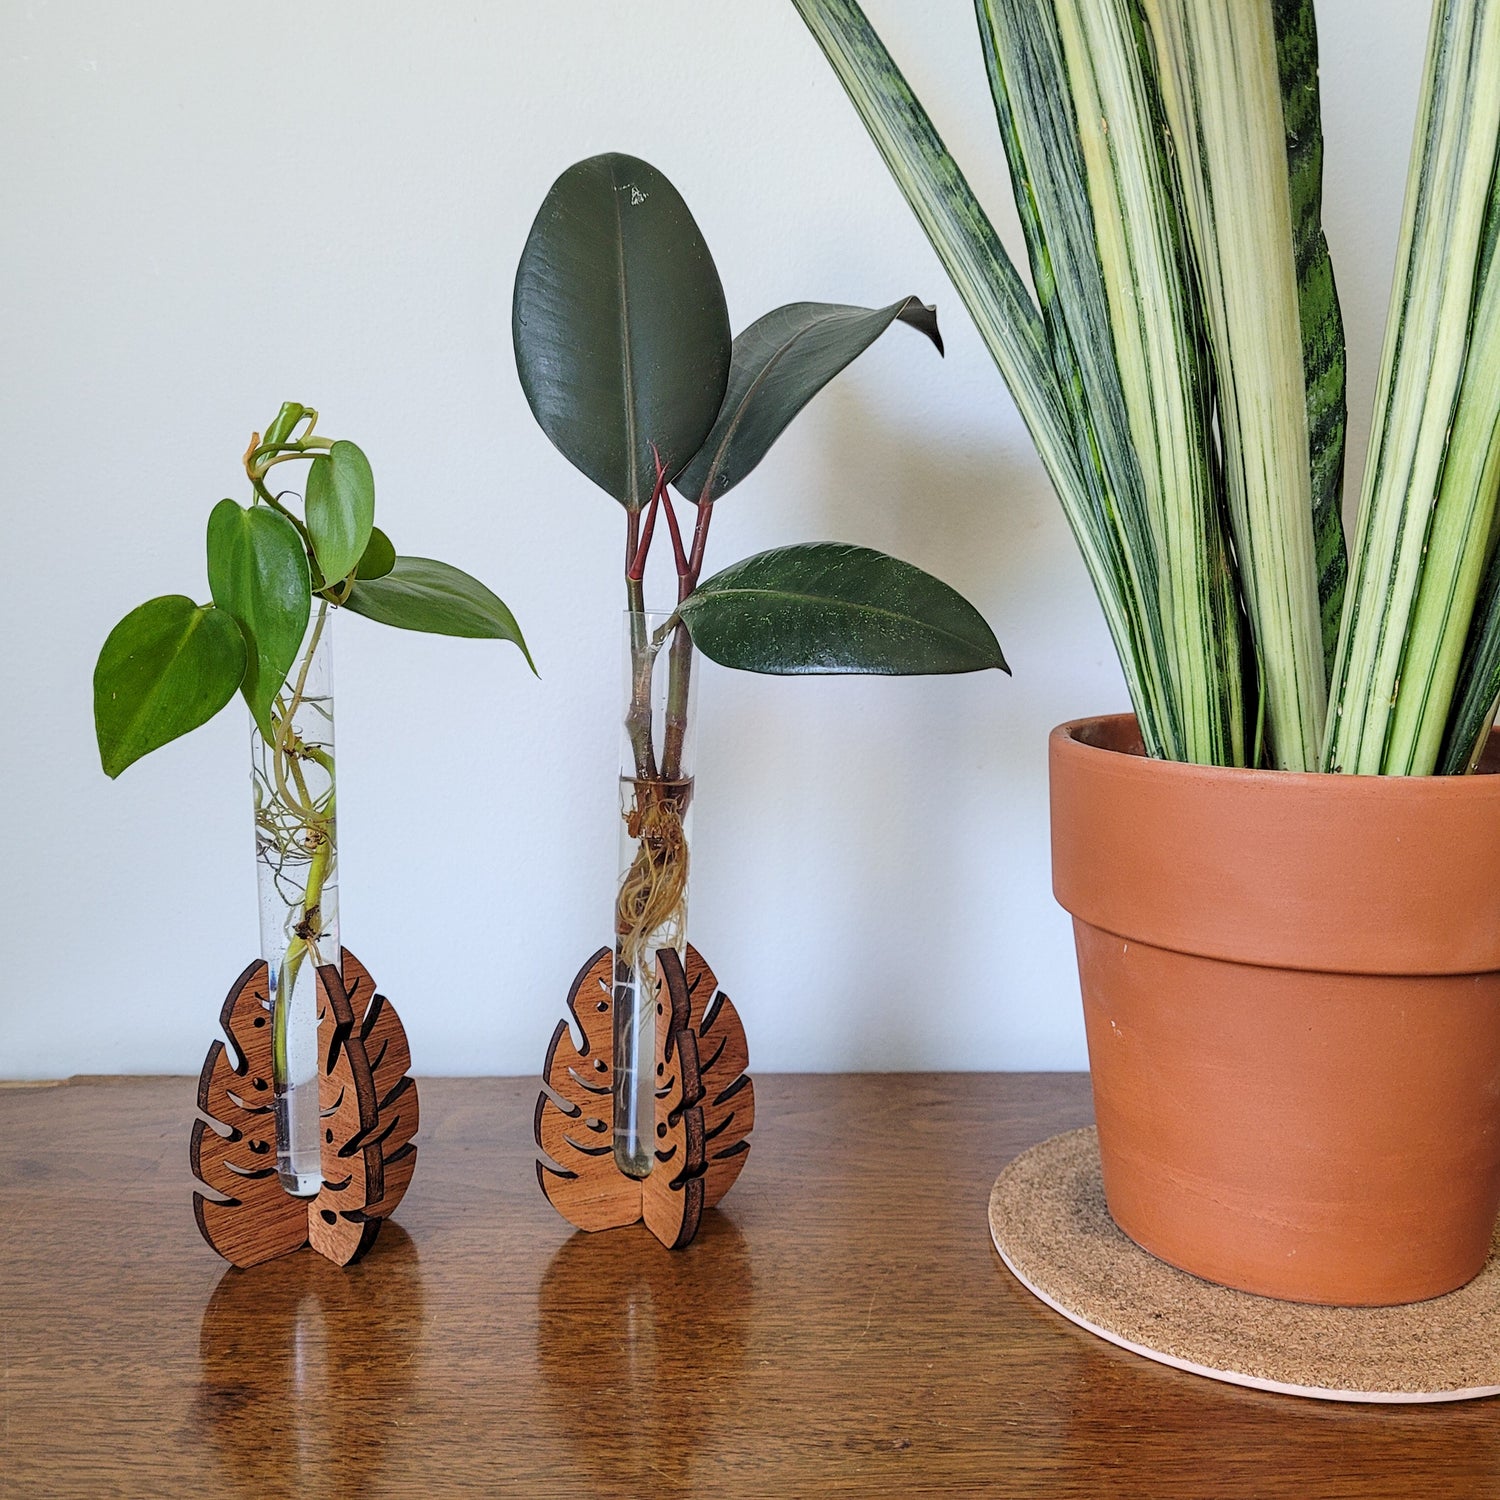 Two wooden monstera leaf stands holding a clear test tube with water and plant cuttings. Sitting on an end table with a snake plant in a clay pot.